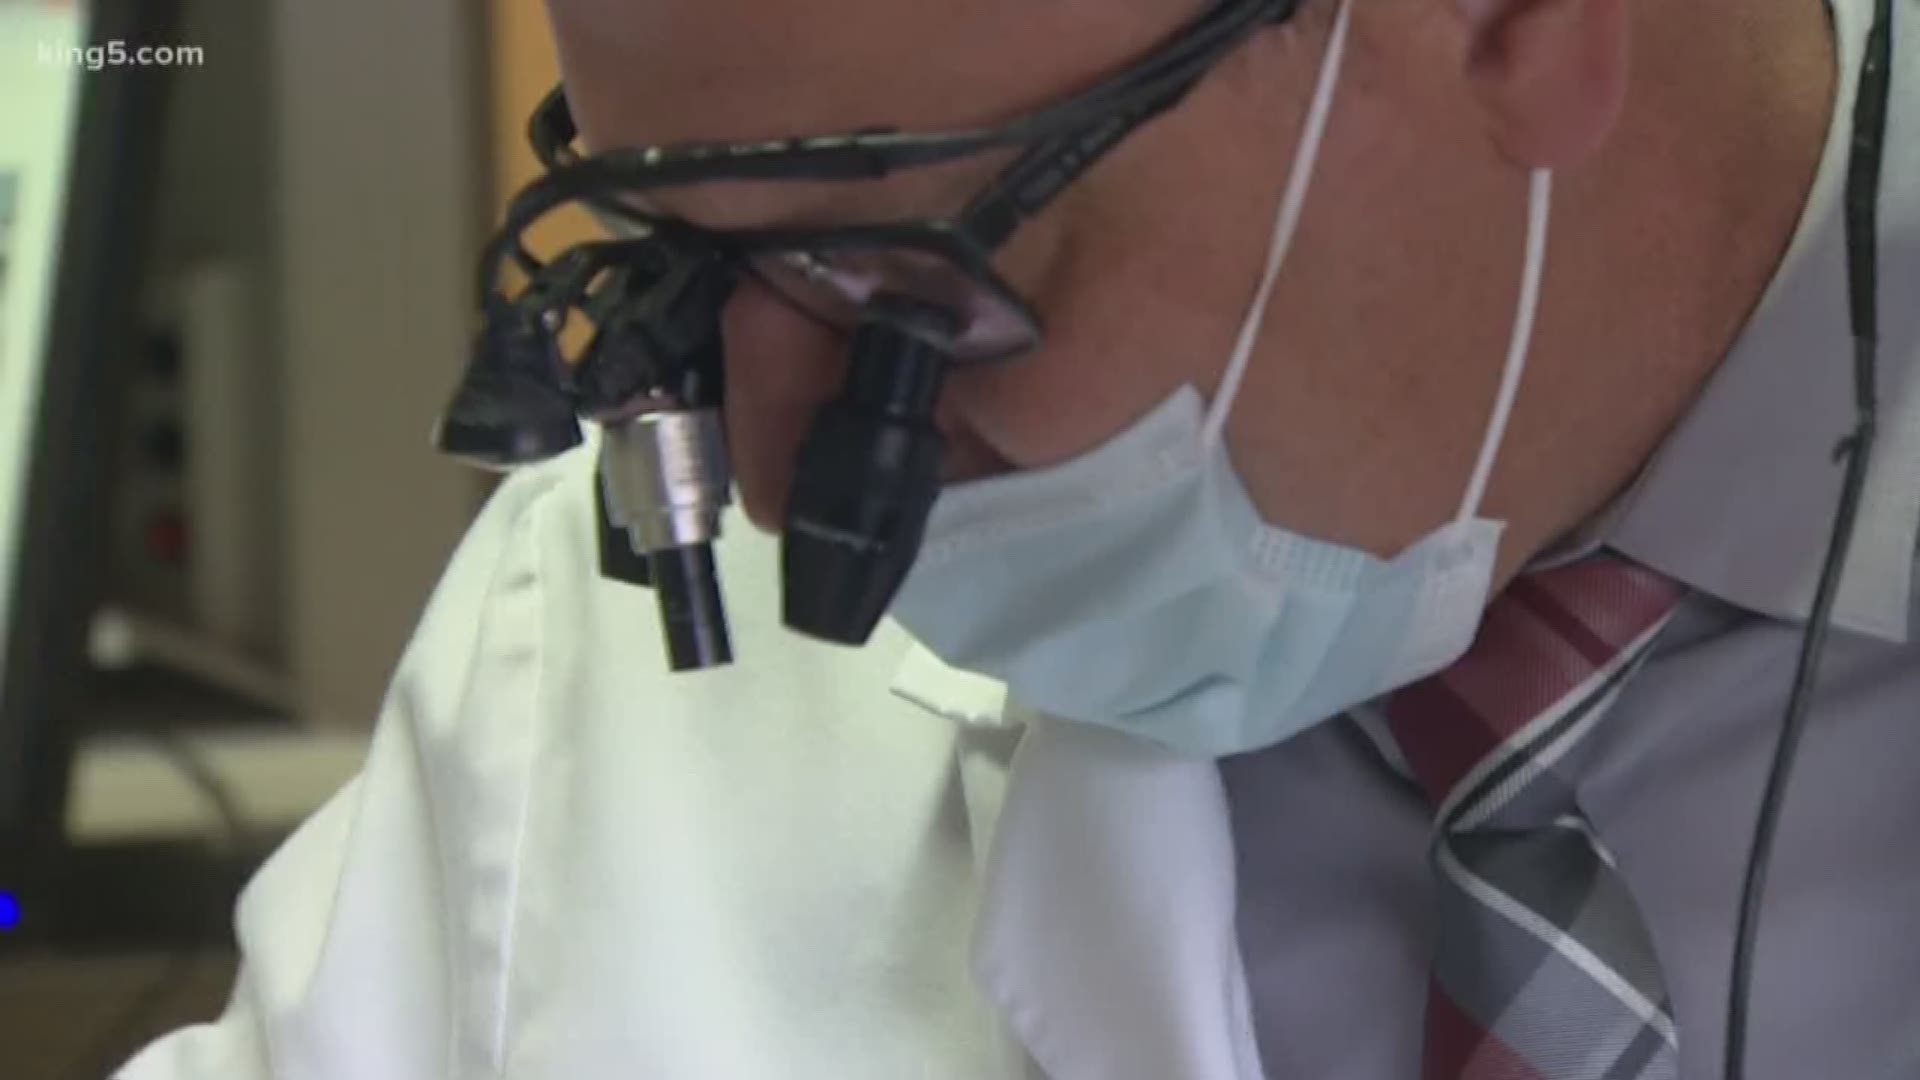 A group of dentists from Washington is suing the nation's biggest dental insurer, saying the company is compromising patient care. If you have dental insurance, chances are good you get it from Delta Dental. KING 5's Eric Wilkinson with how frustrated doctors and patients are fighting back.